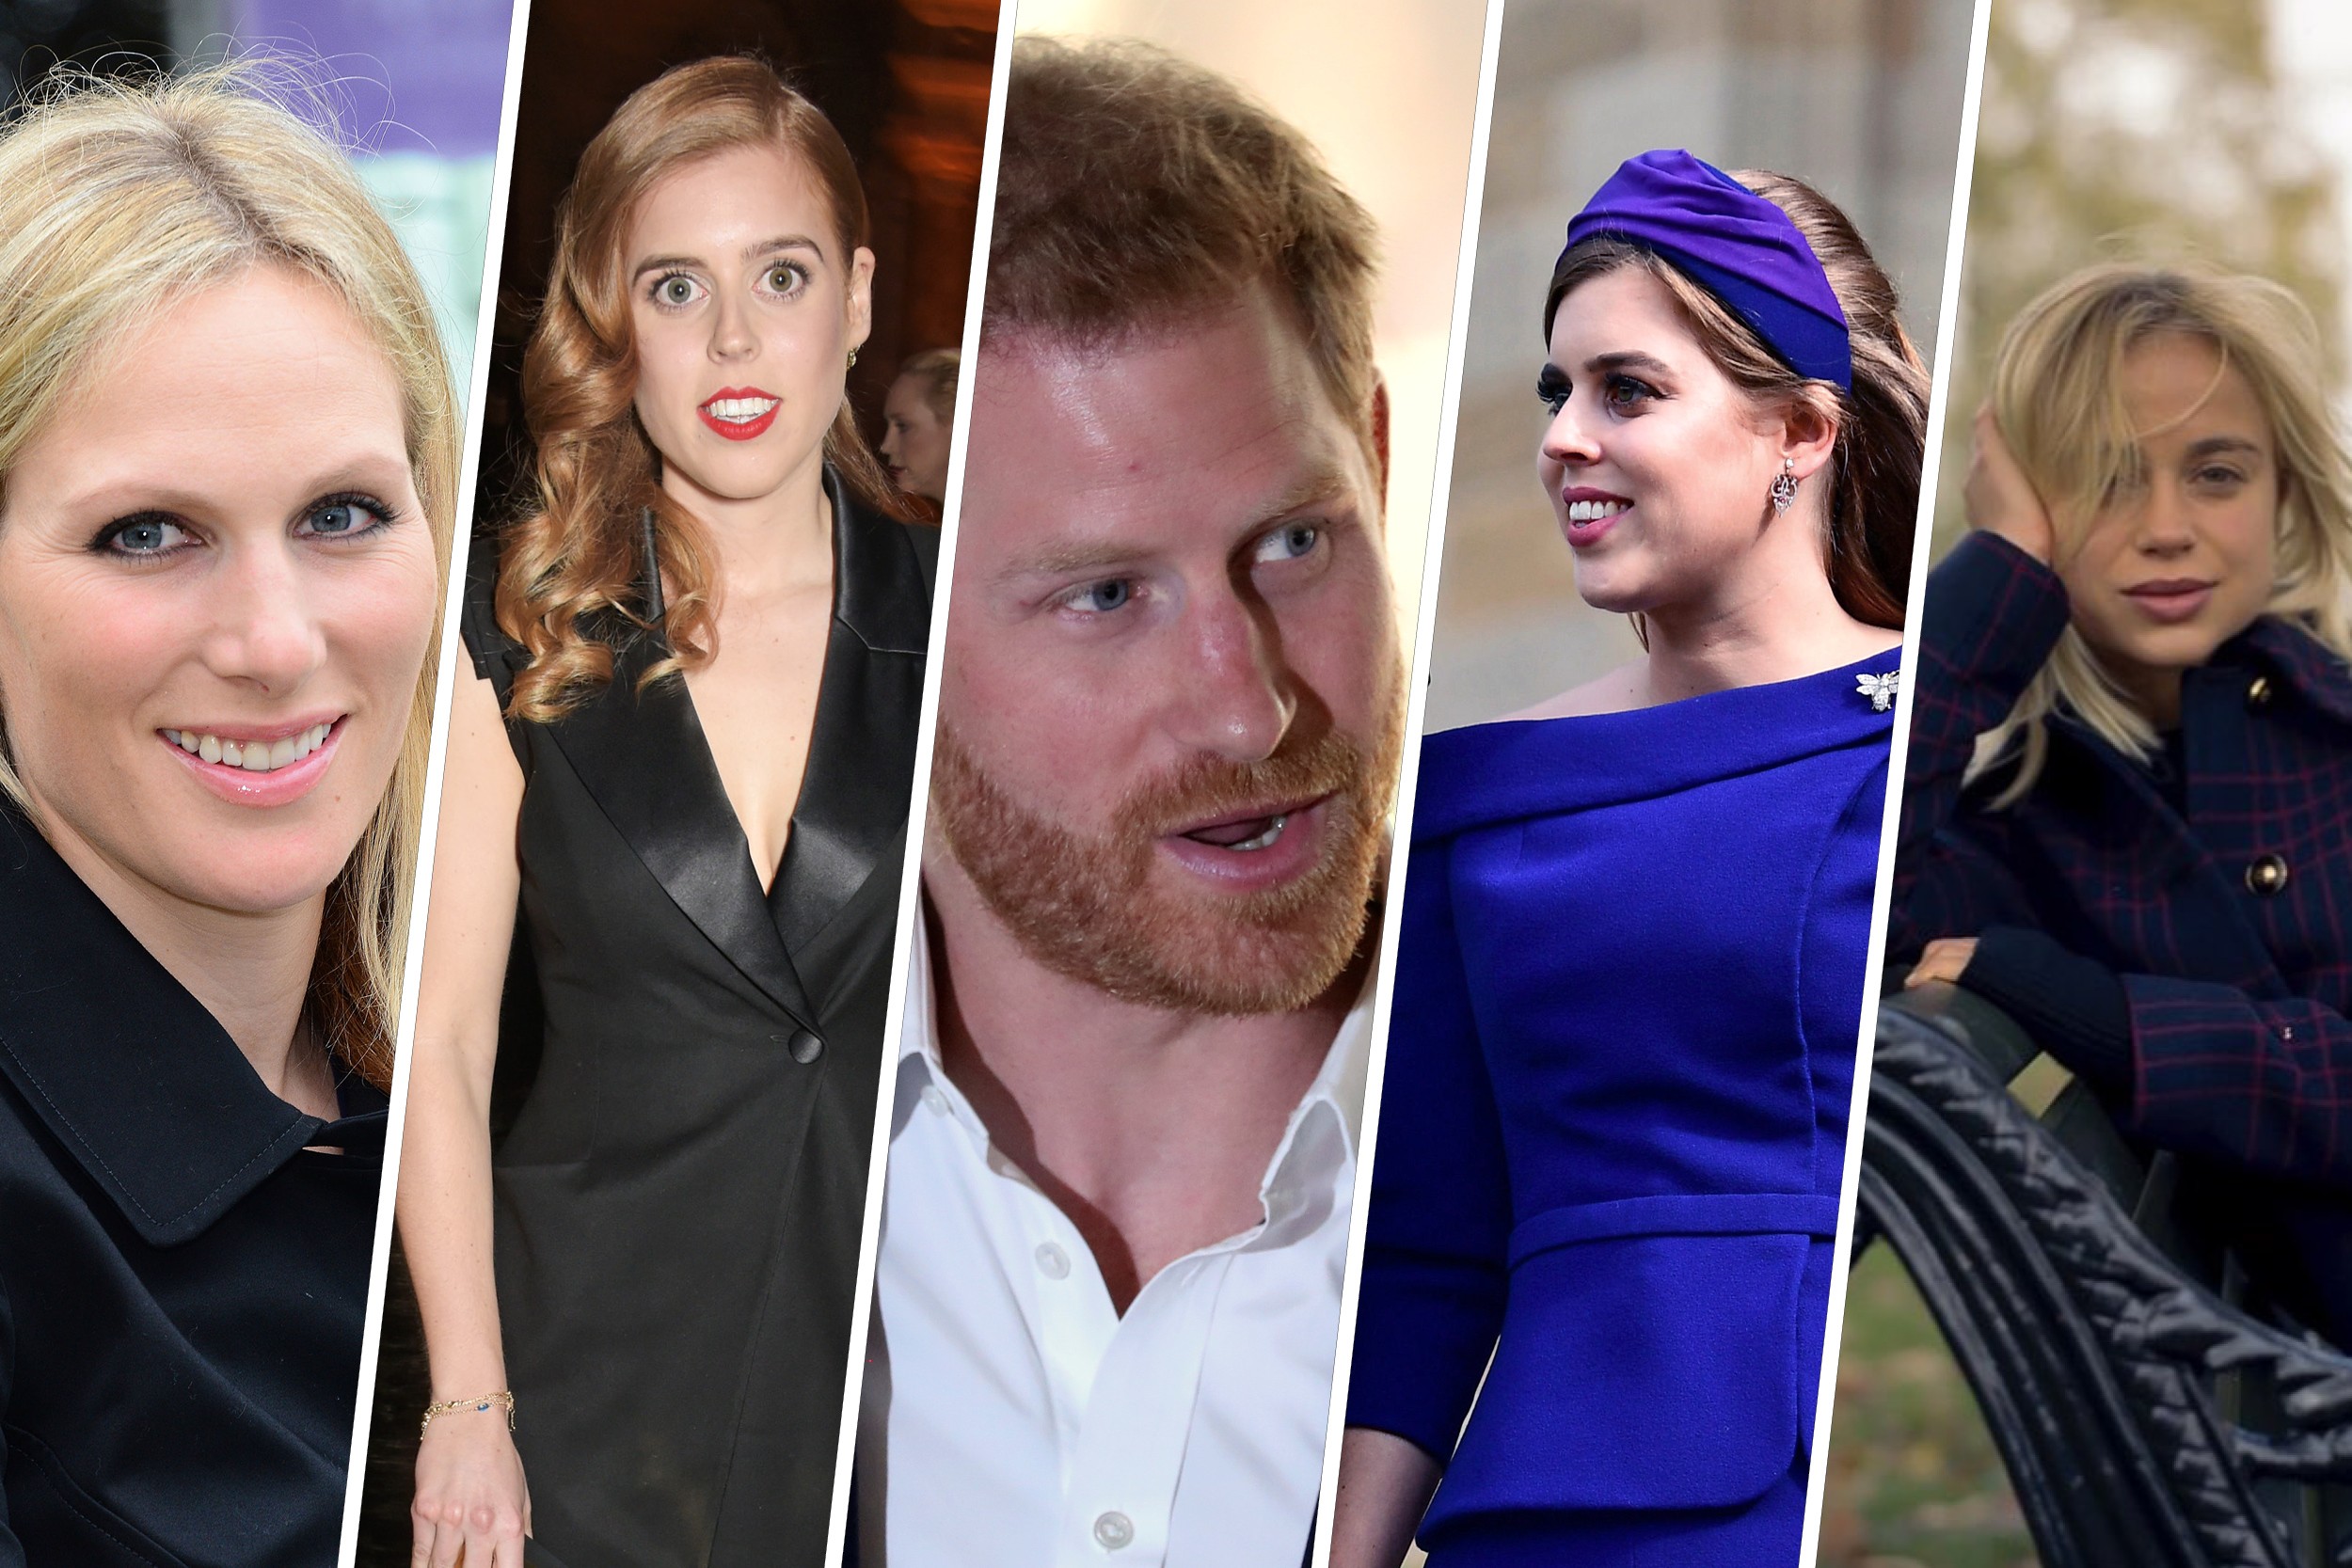 Zara Phillips, Princess Beatrice, Prince Harry, Princess Eugenie and Lady Amelia Windsor have all said no to financial dependence on the British crown. Photos: AP/Reuters/Instagram